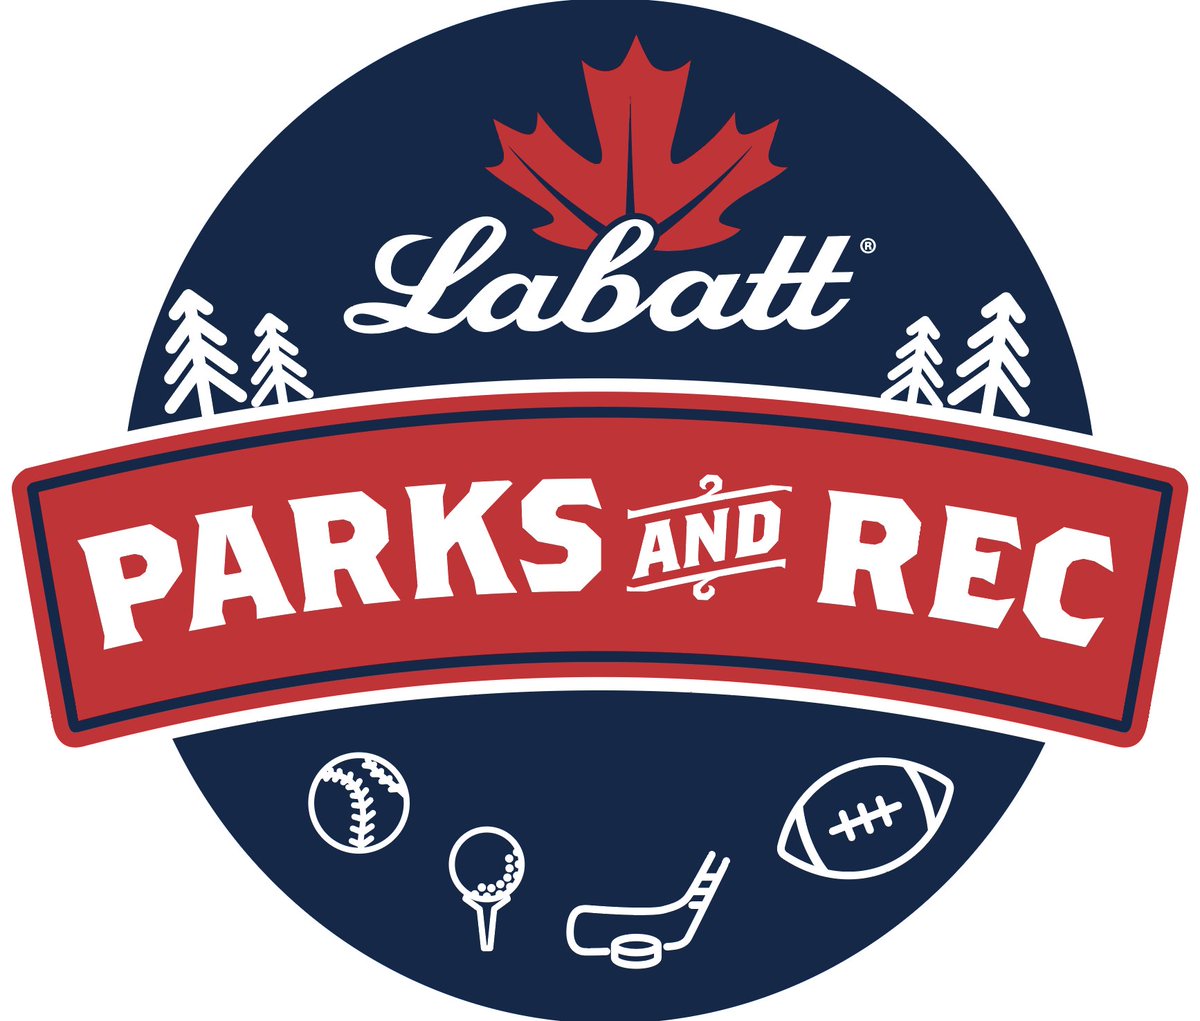 Year two of Parks and Rec is ready for you! We're offering $500 Labatt sponsorships to adult rec teams in Buffalo NY and Detroit, MI, along with limited-edition Labatt Parks and Rec Swag! Apply today --> lbtt.us/x